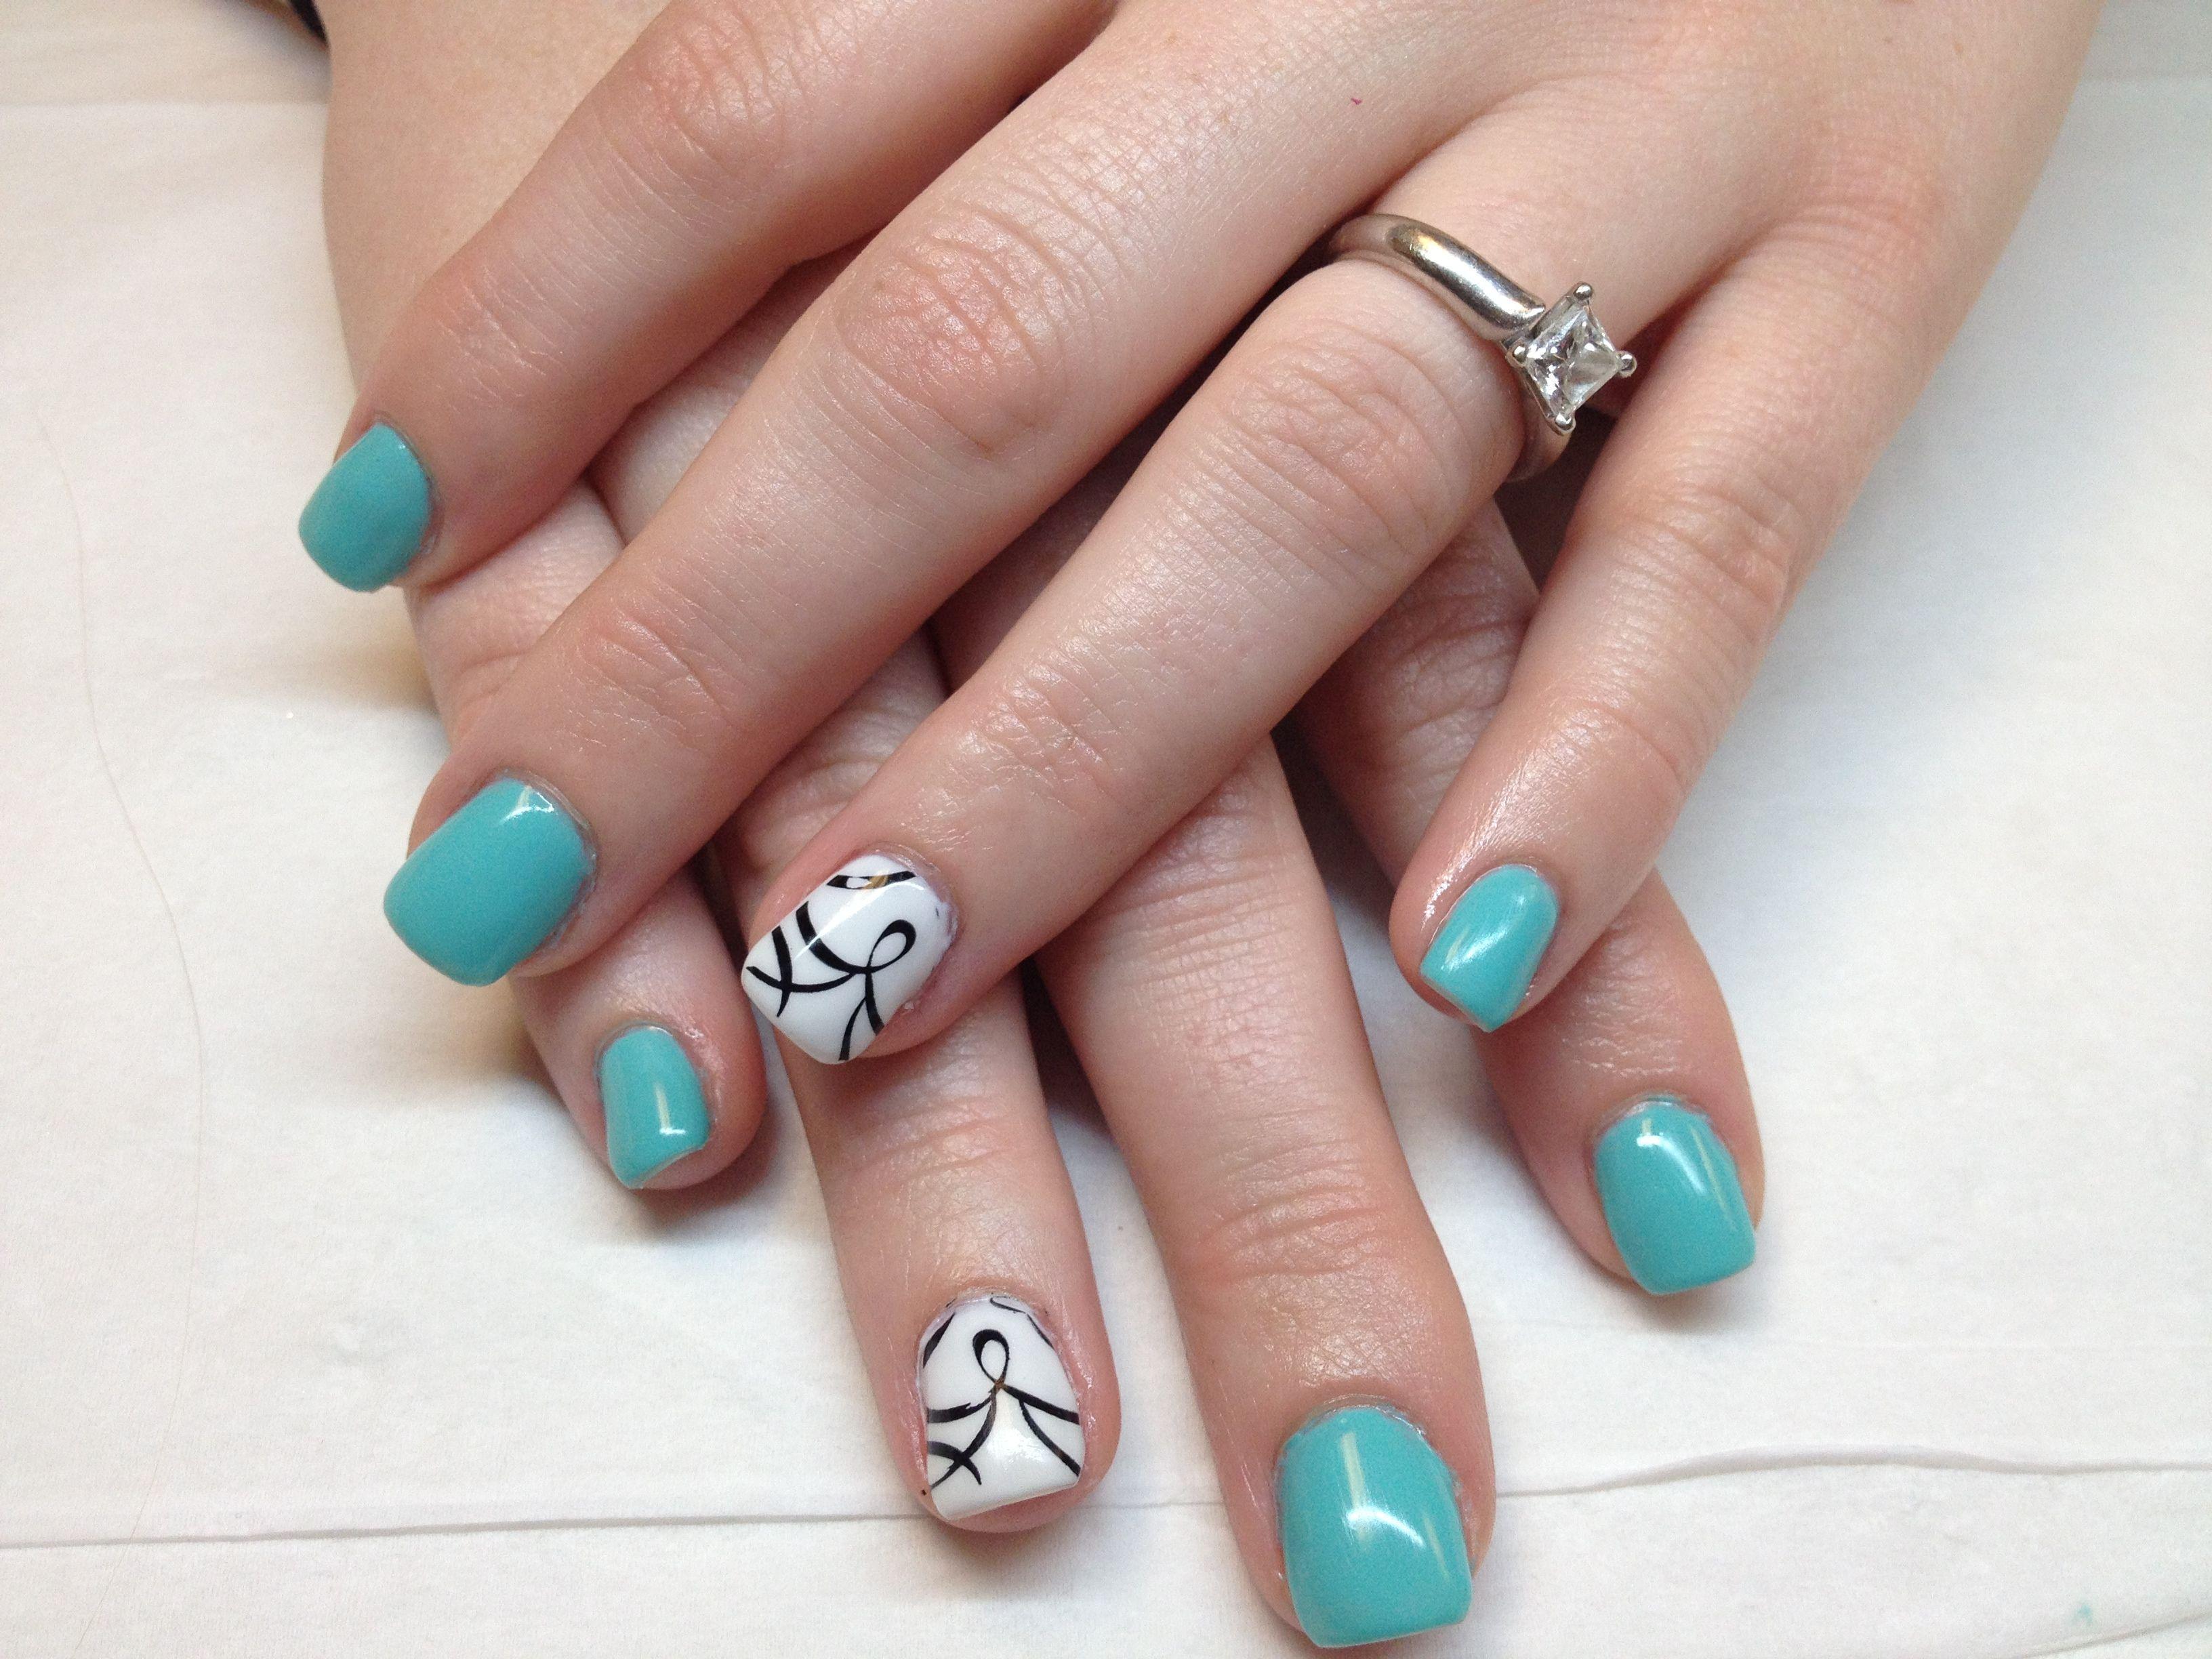 Teal black and white gel with freehand leopard print nail art